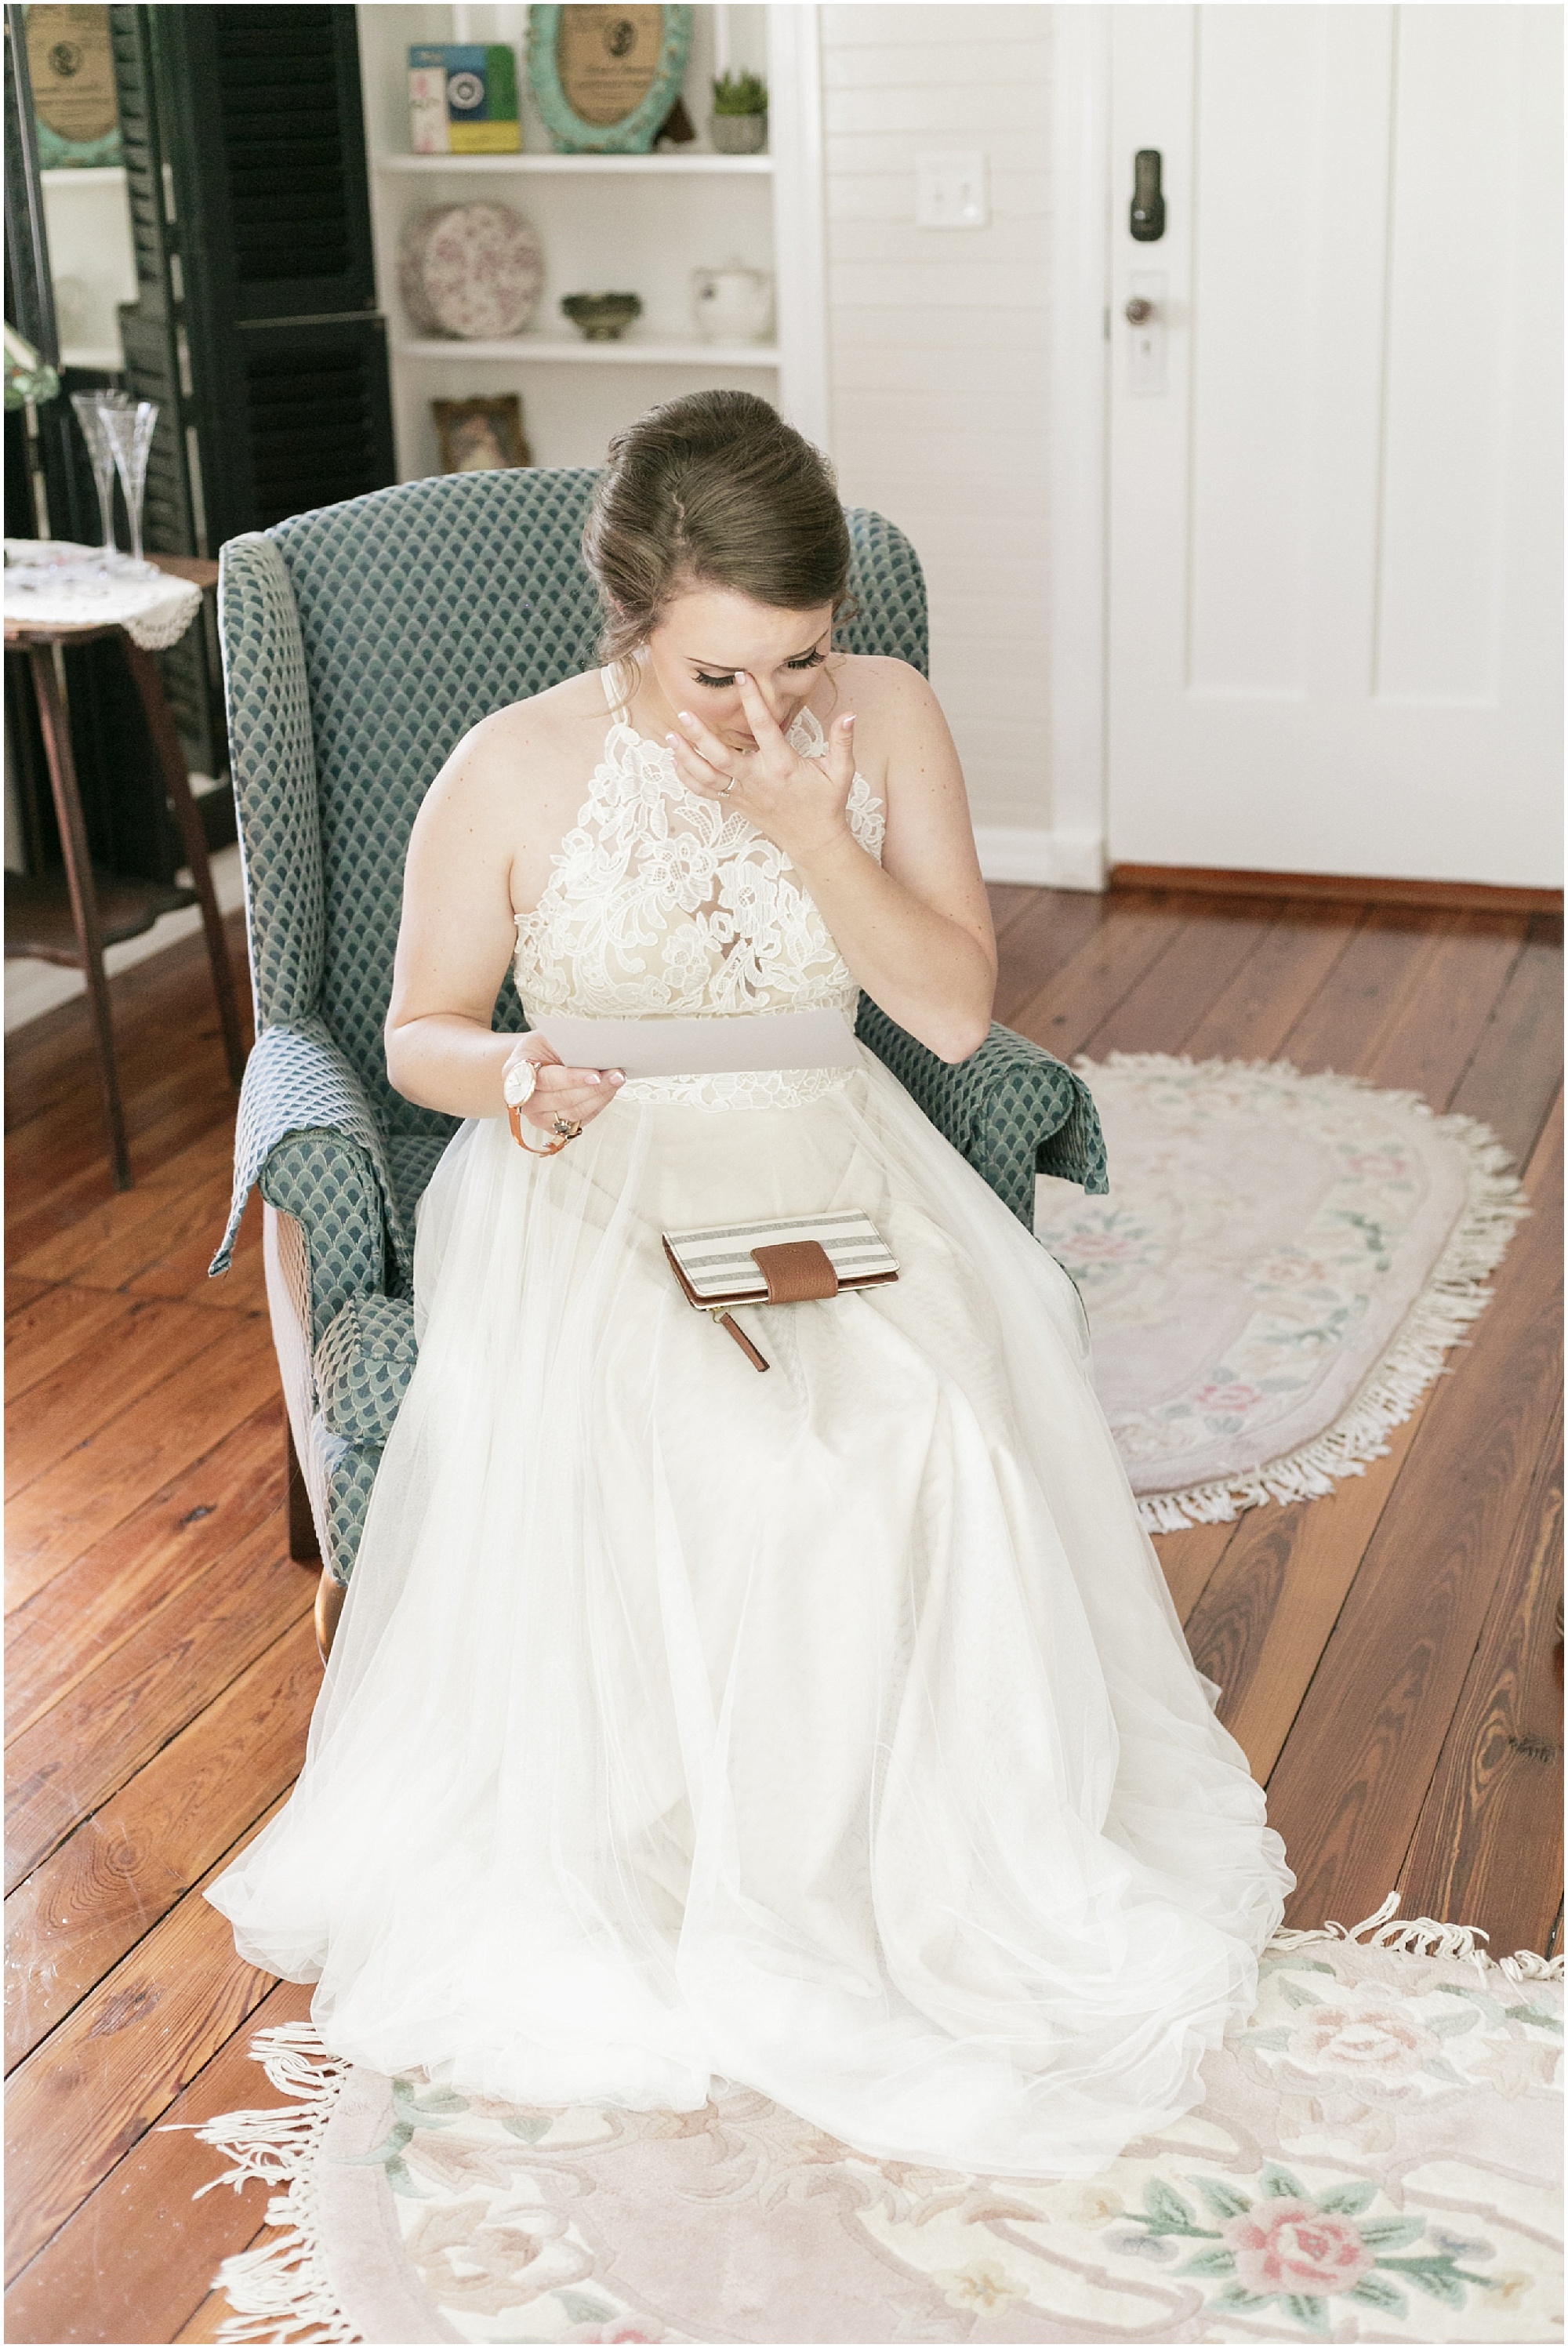 Bride wiping her tears away as she reads a love note from her groom.